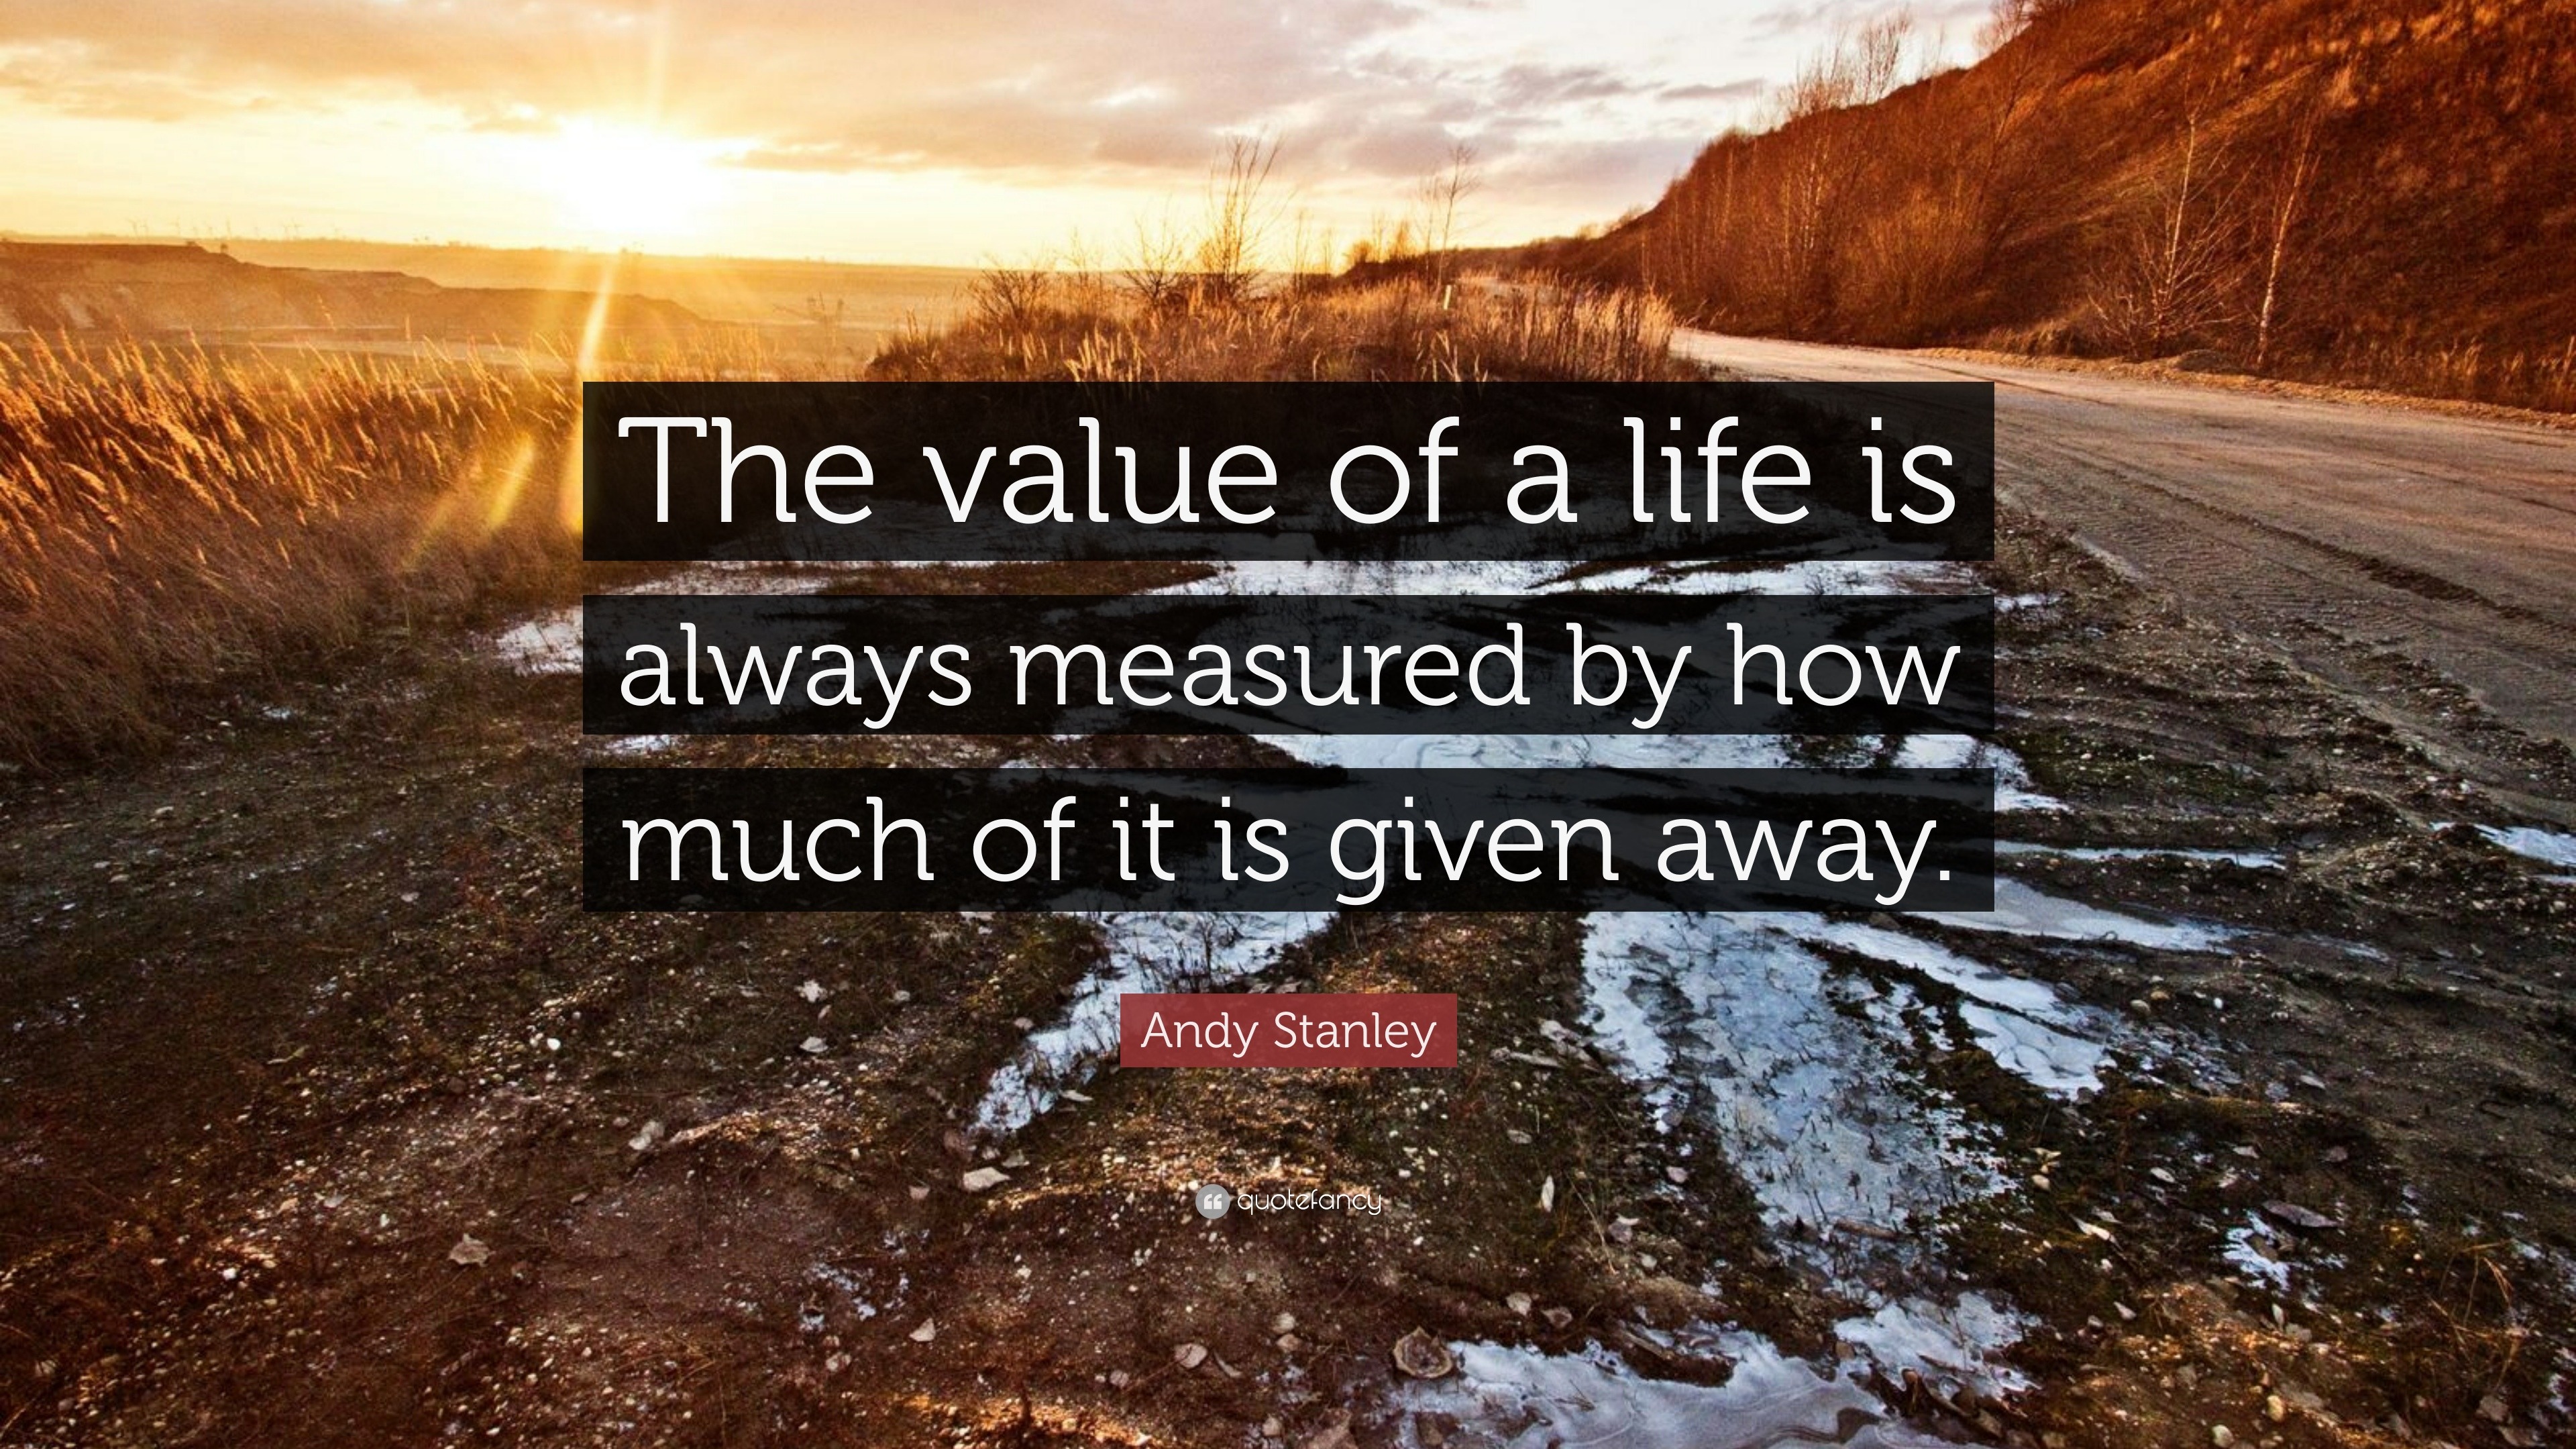 Andy Stanley Quote: “The value of a life is always measured by how much